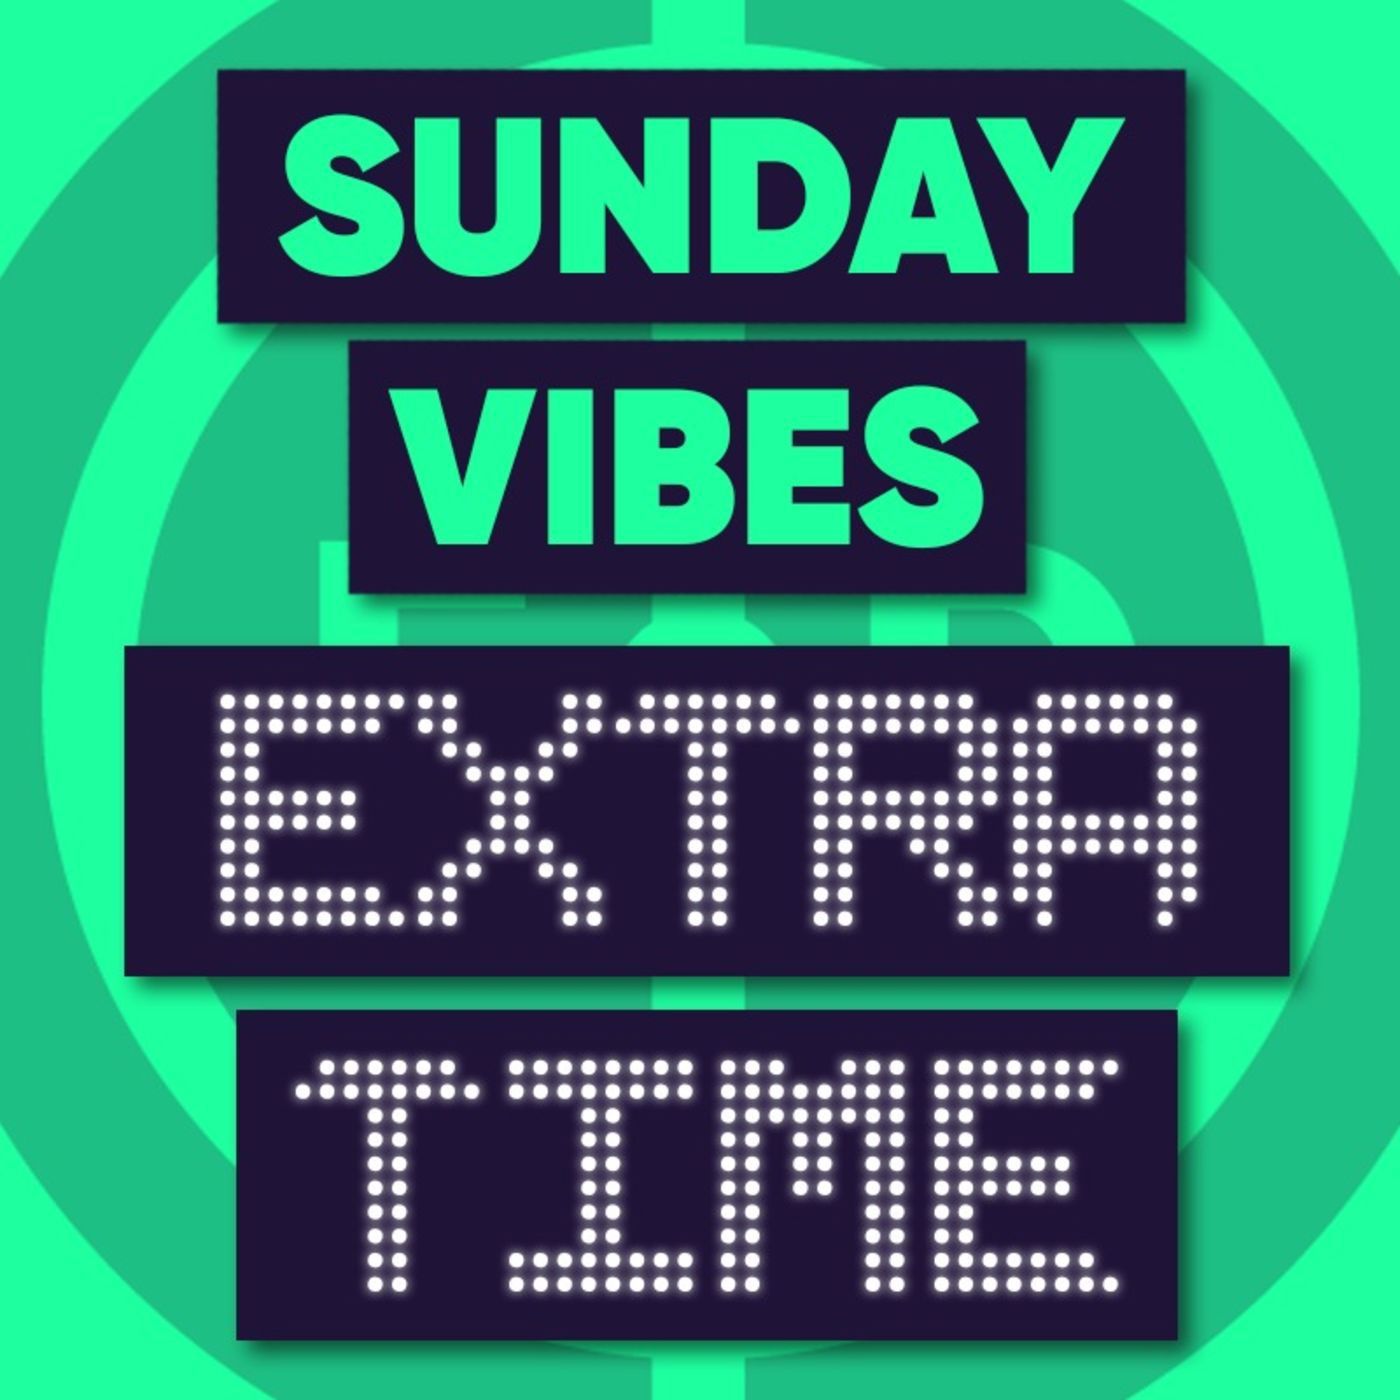 Extra limited. Extra time. Sunday Vibes перевод. Pacific Sunday Vibes. Pa time.